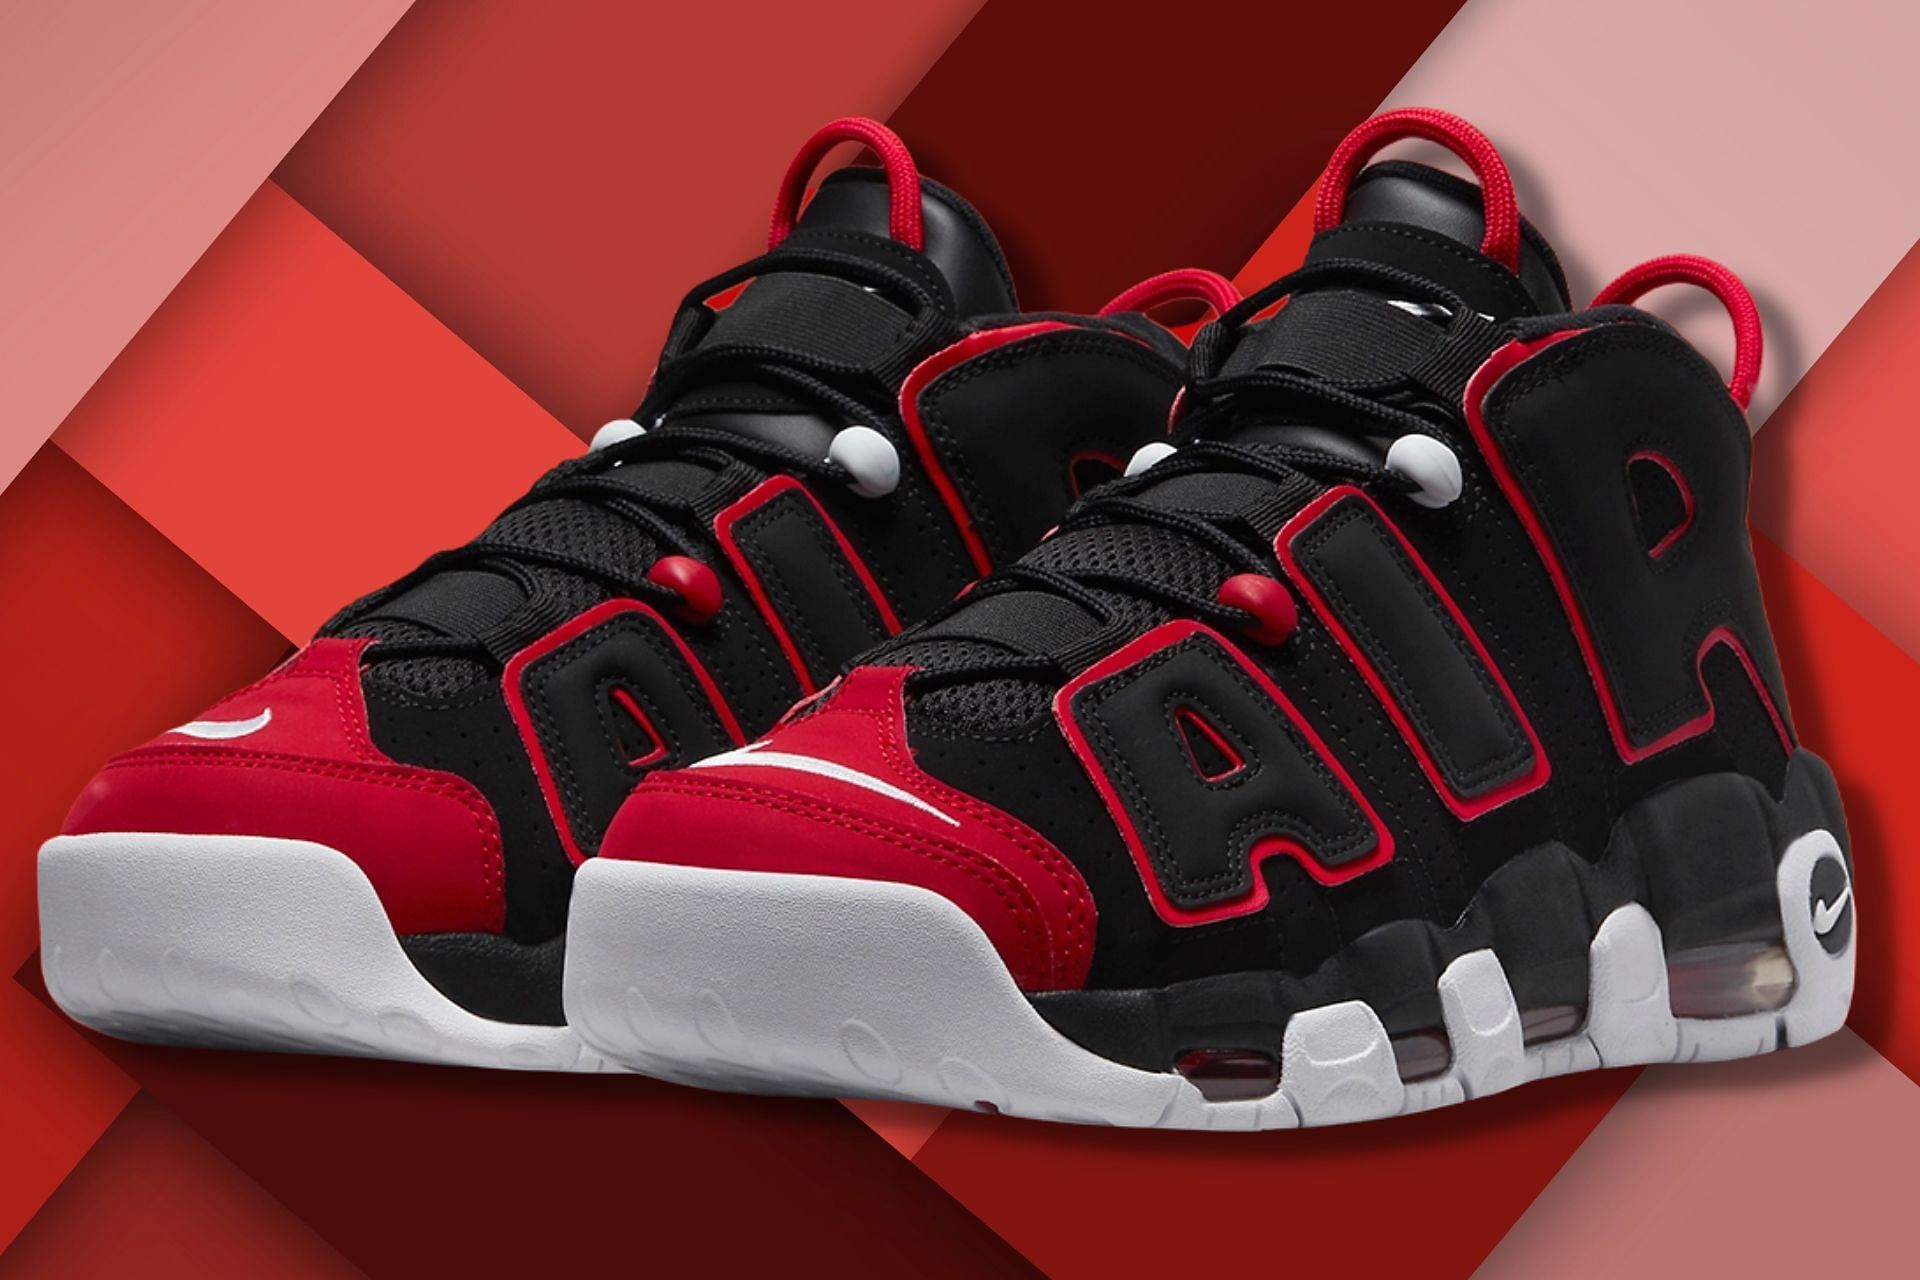 Nike Air More Uptempo Red Toe colorway (Image via Nike)